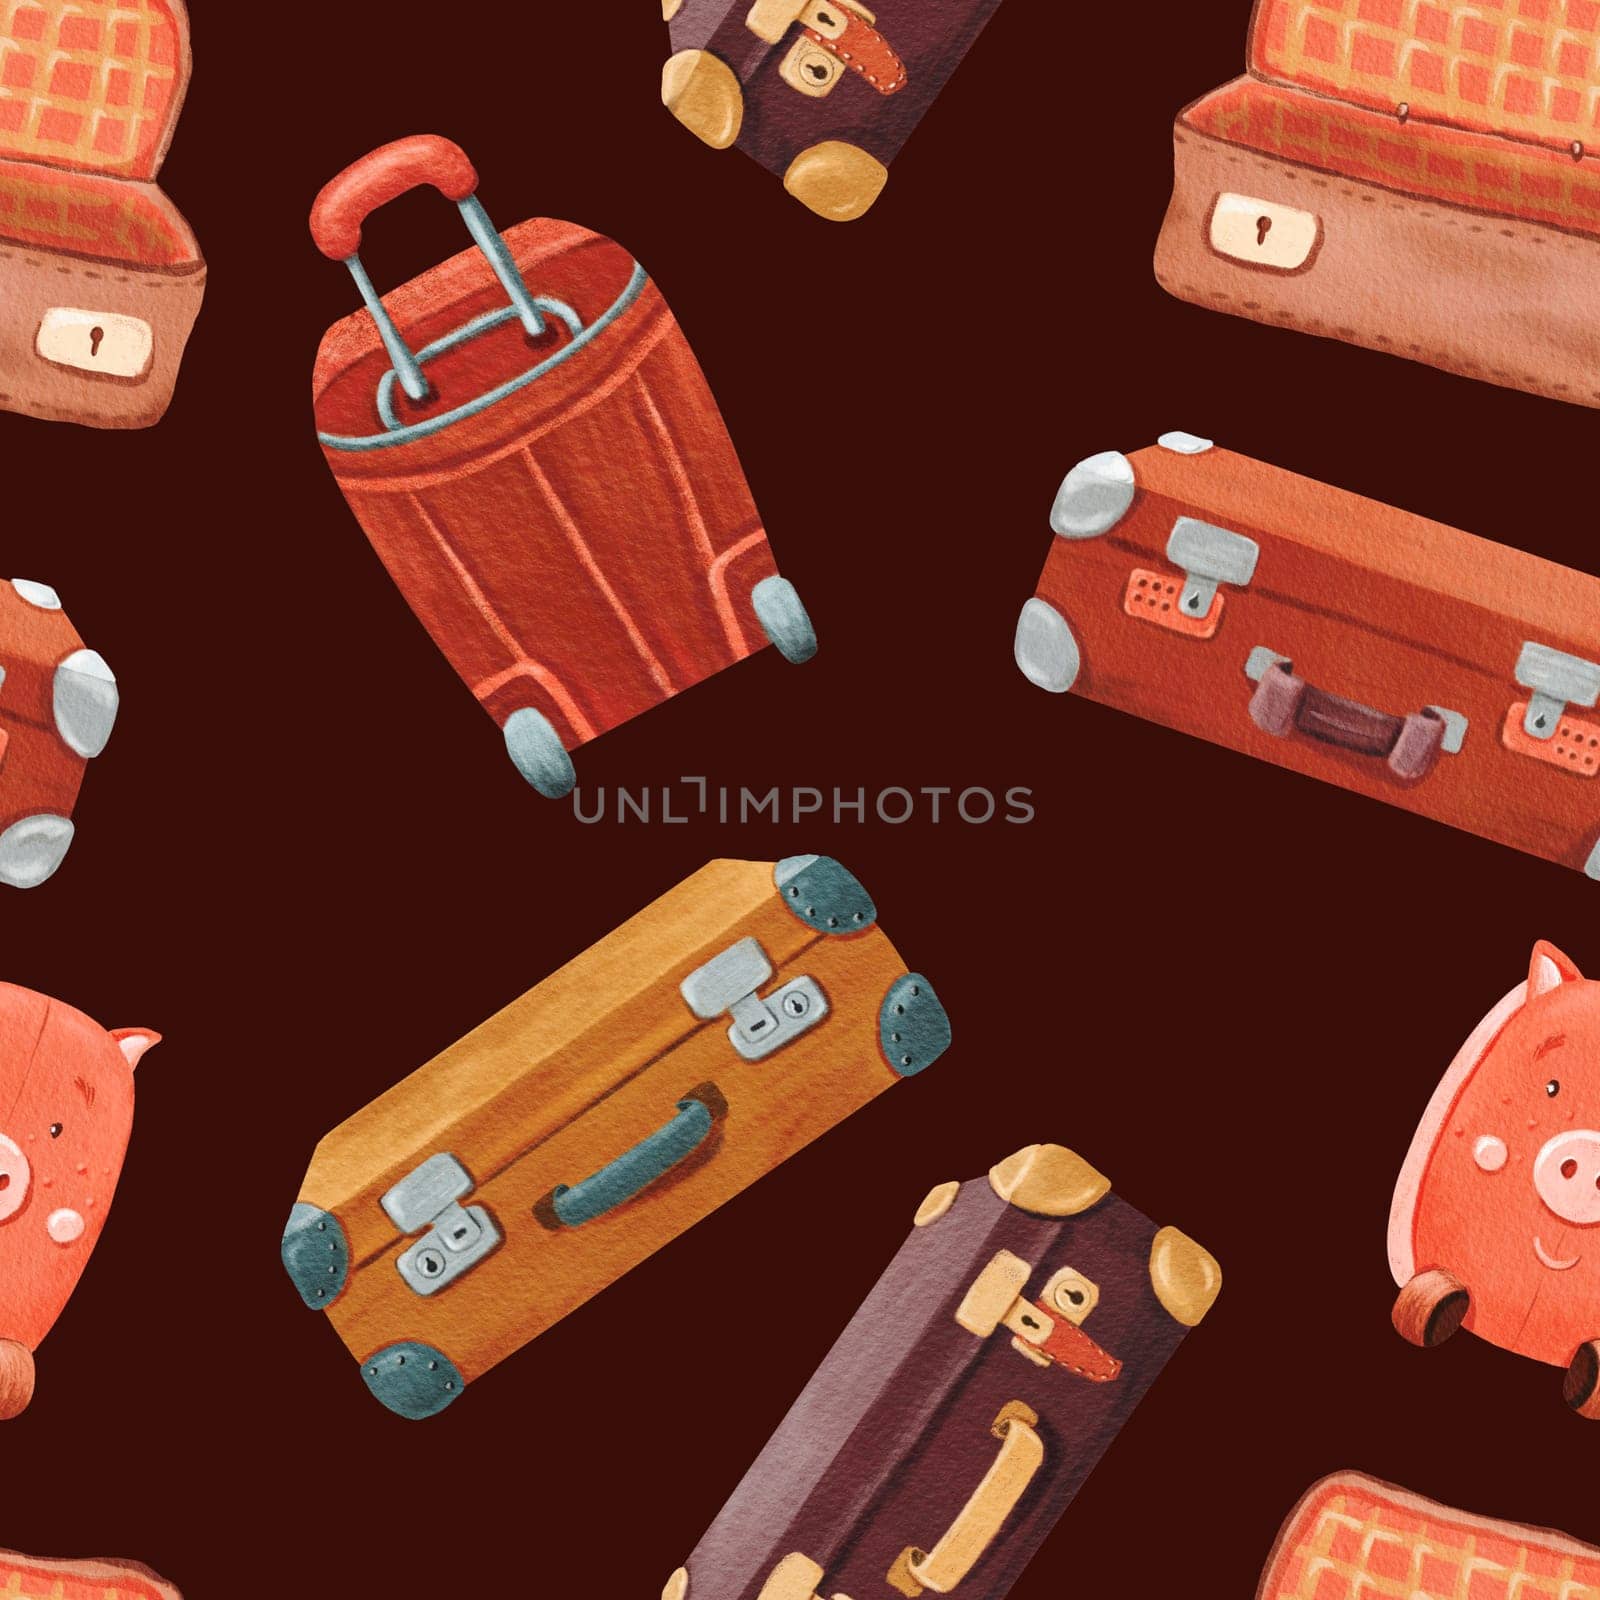 Seamless pattern of open and close Stylish brown retro suitcase, child luggage . Old vintage leather briefcase baggage. Travel stuff. Hand drawn retro bag. Watercolor colored illustration.